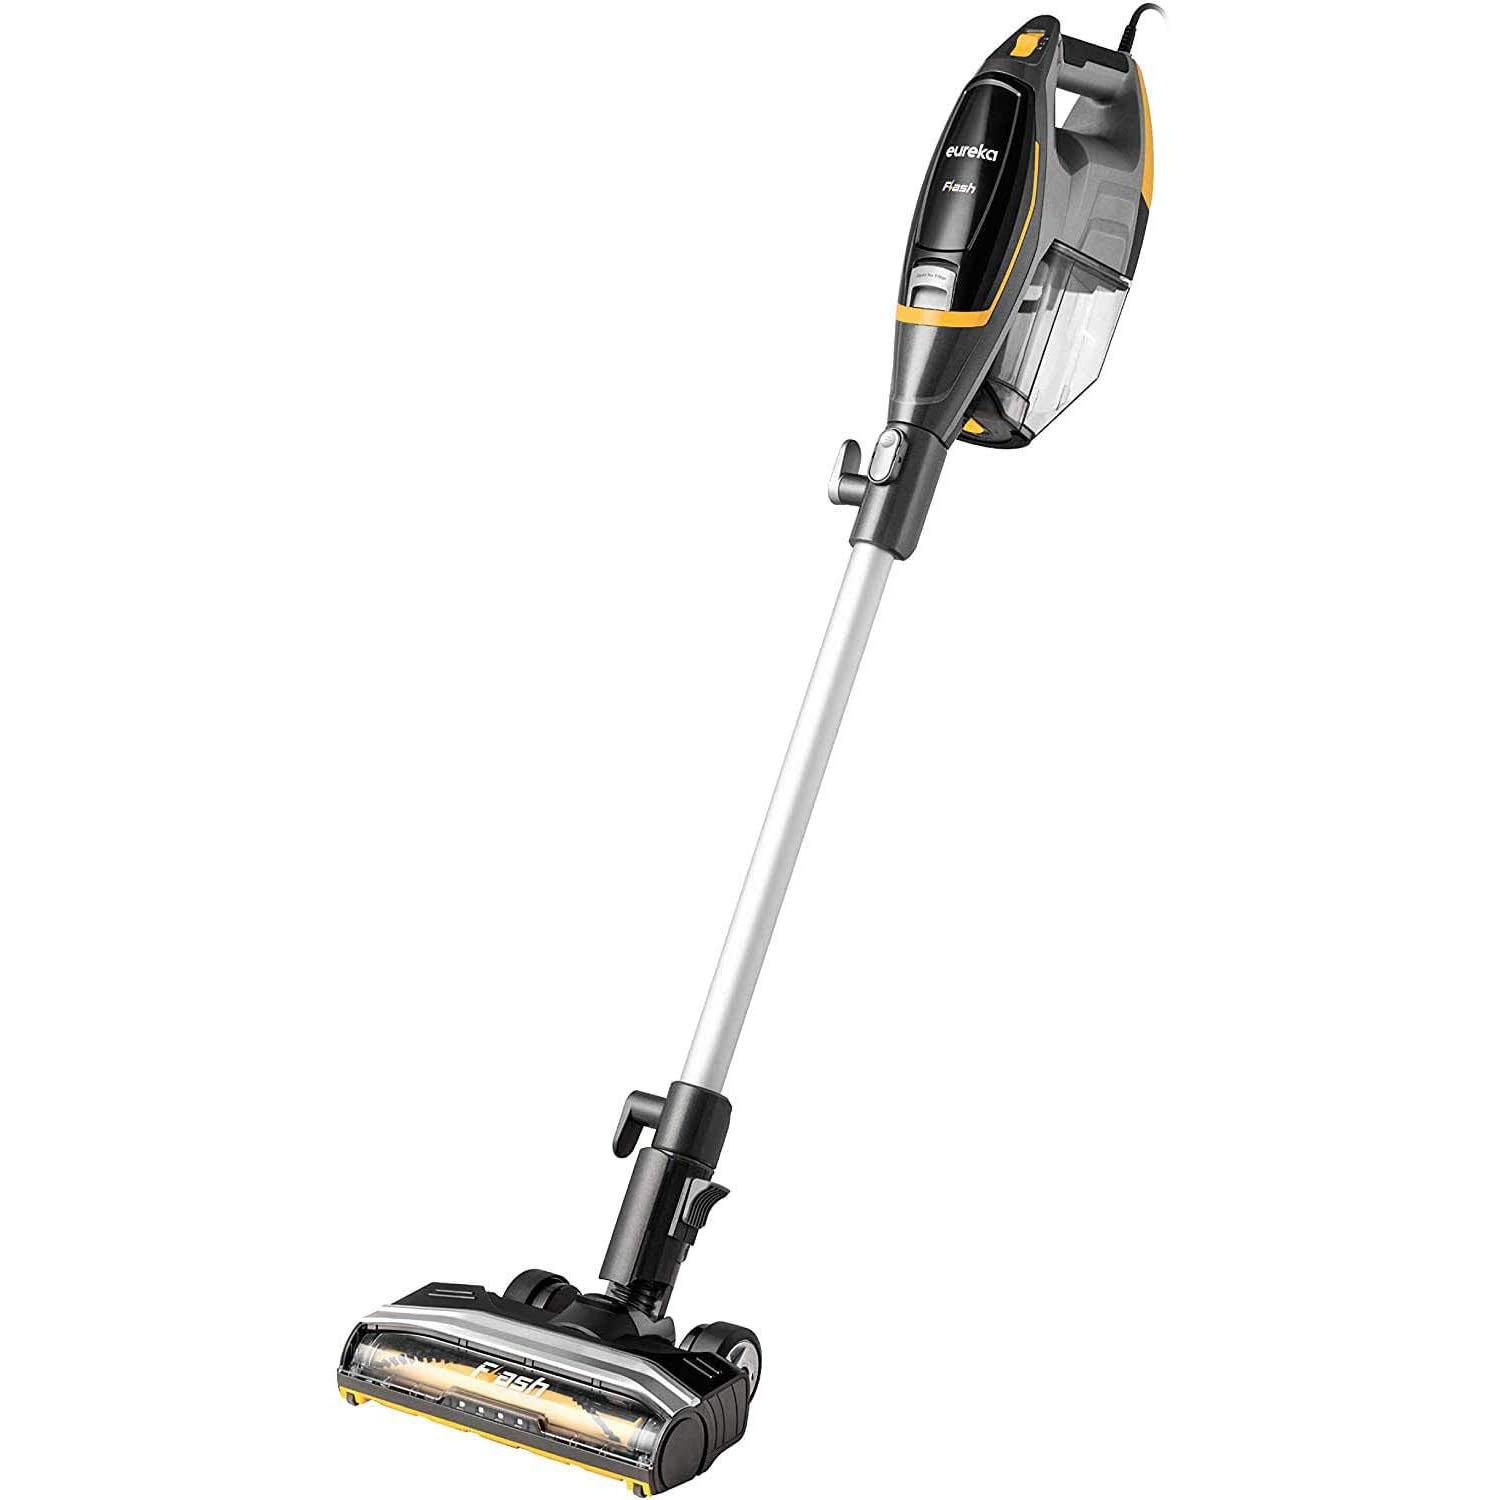 Eureka Flash Lightweight Stick Vacuum Cleaner for $92.99 Shipped